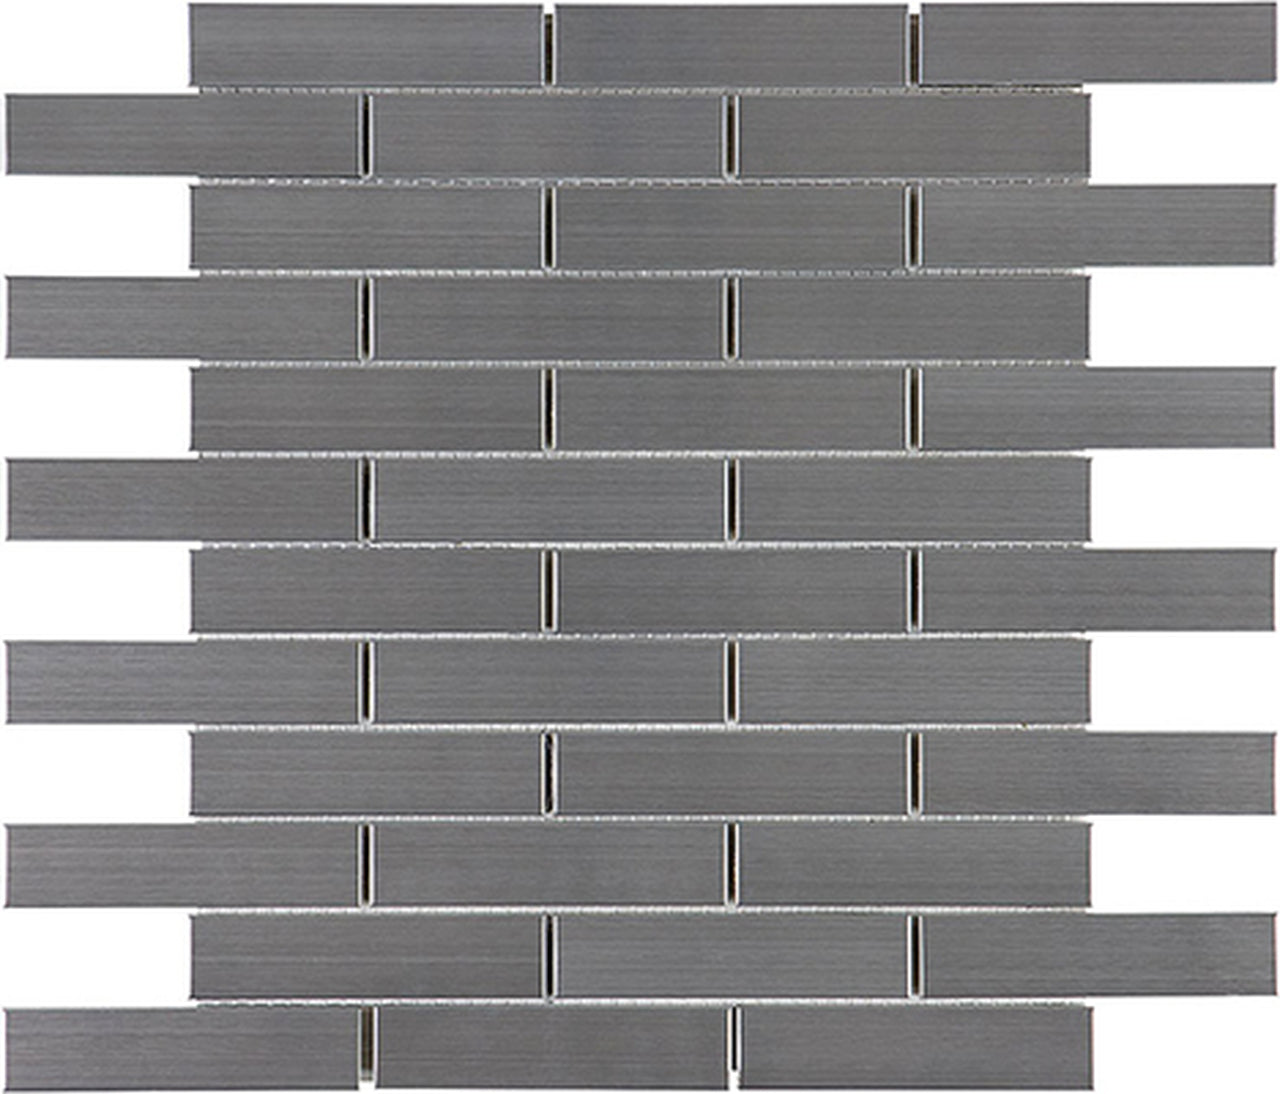 1 X 4 In Brick Stainless Steel Mosaic